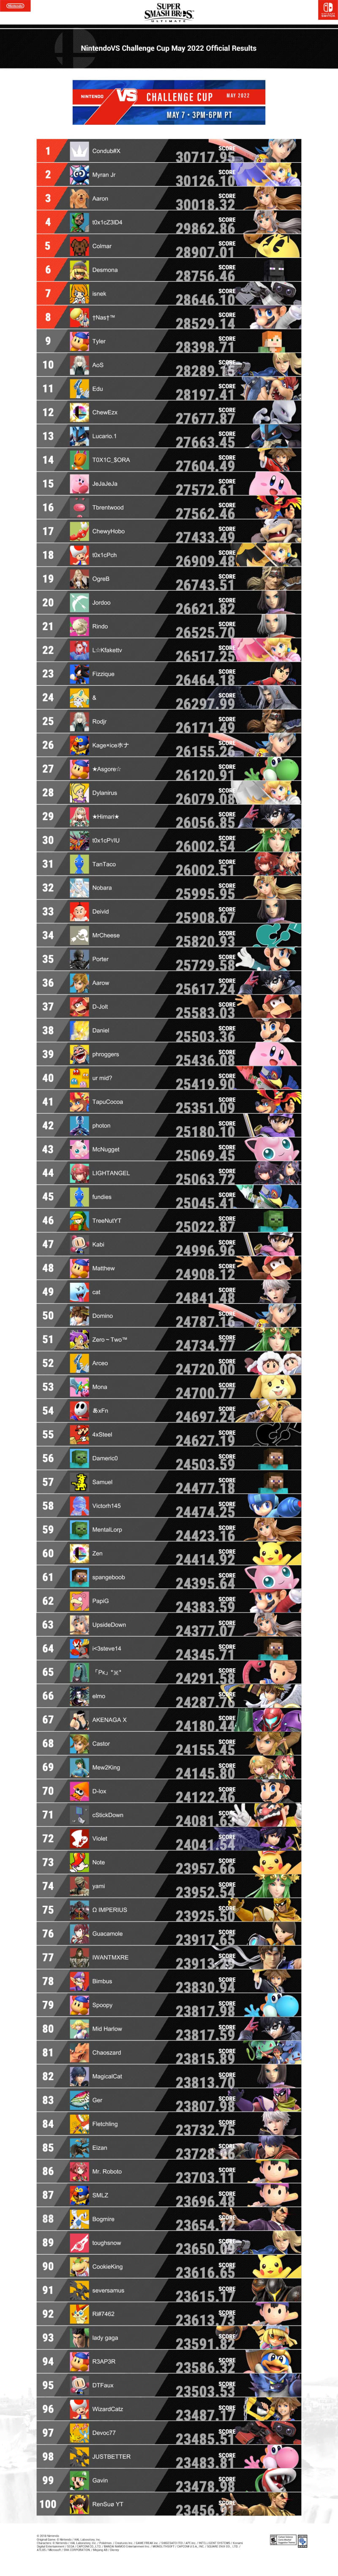 NintendoVS Challenge Cup May 2022 tournament results - News